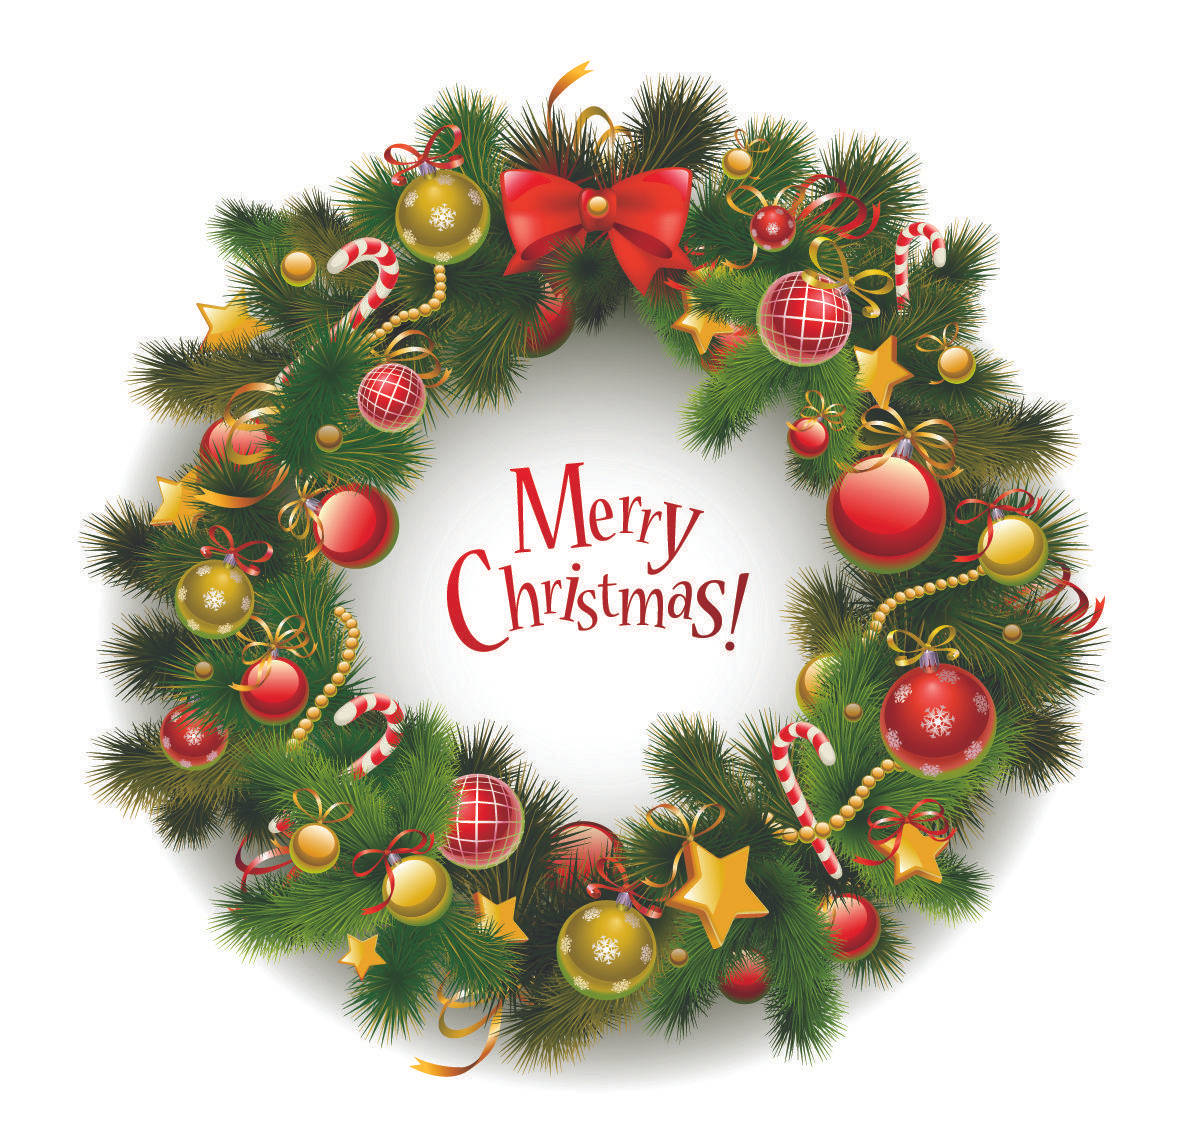 Merry Christmas Wreath Graphic Wallpaper